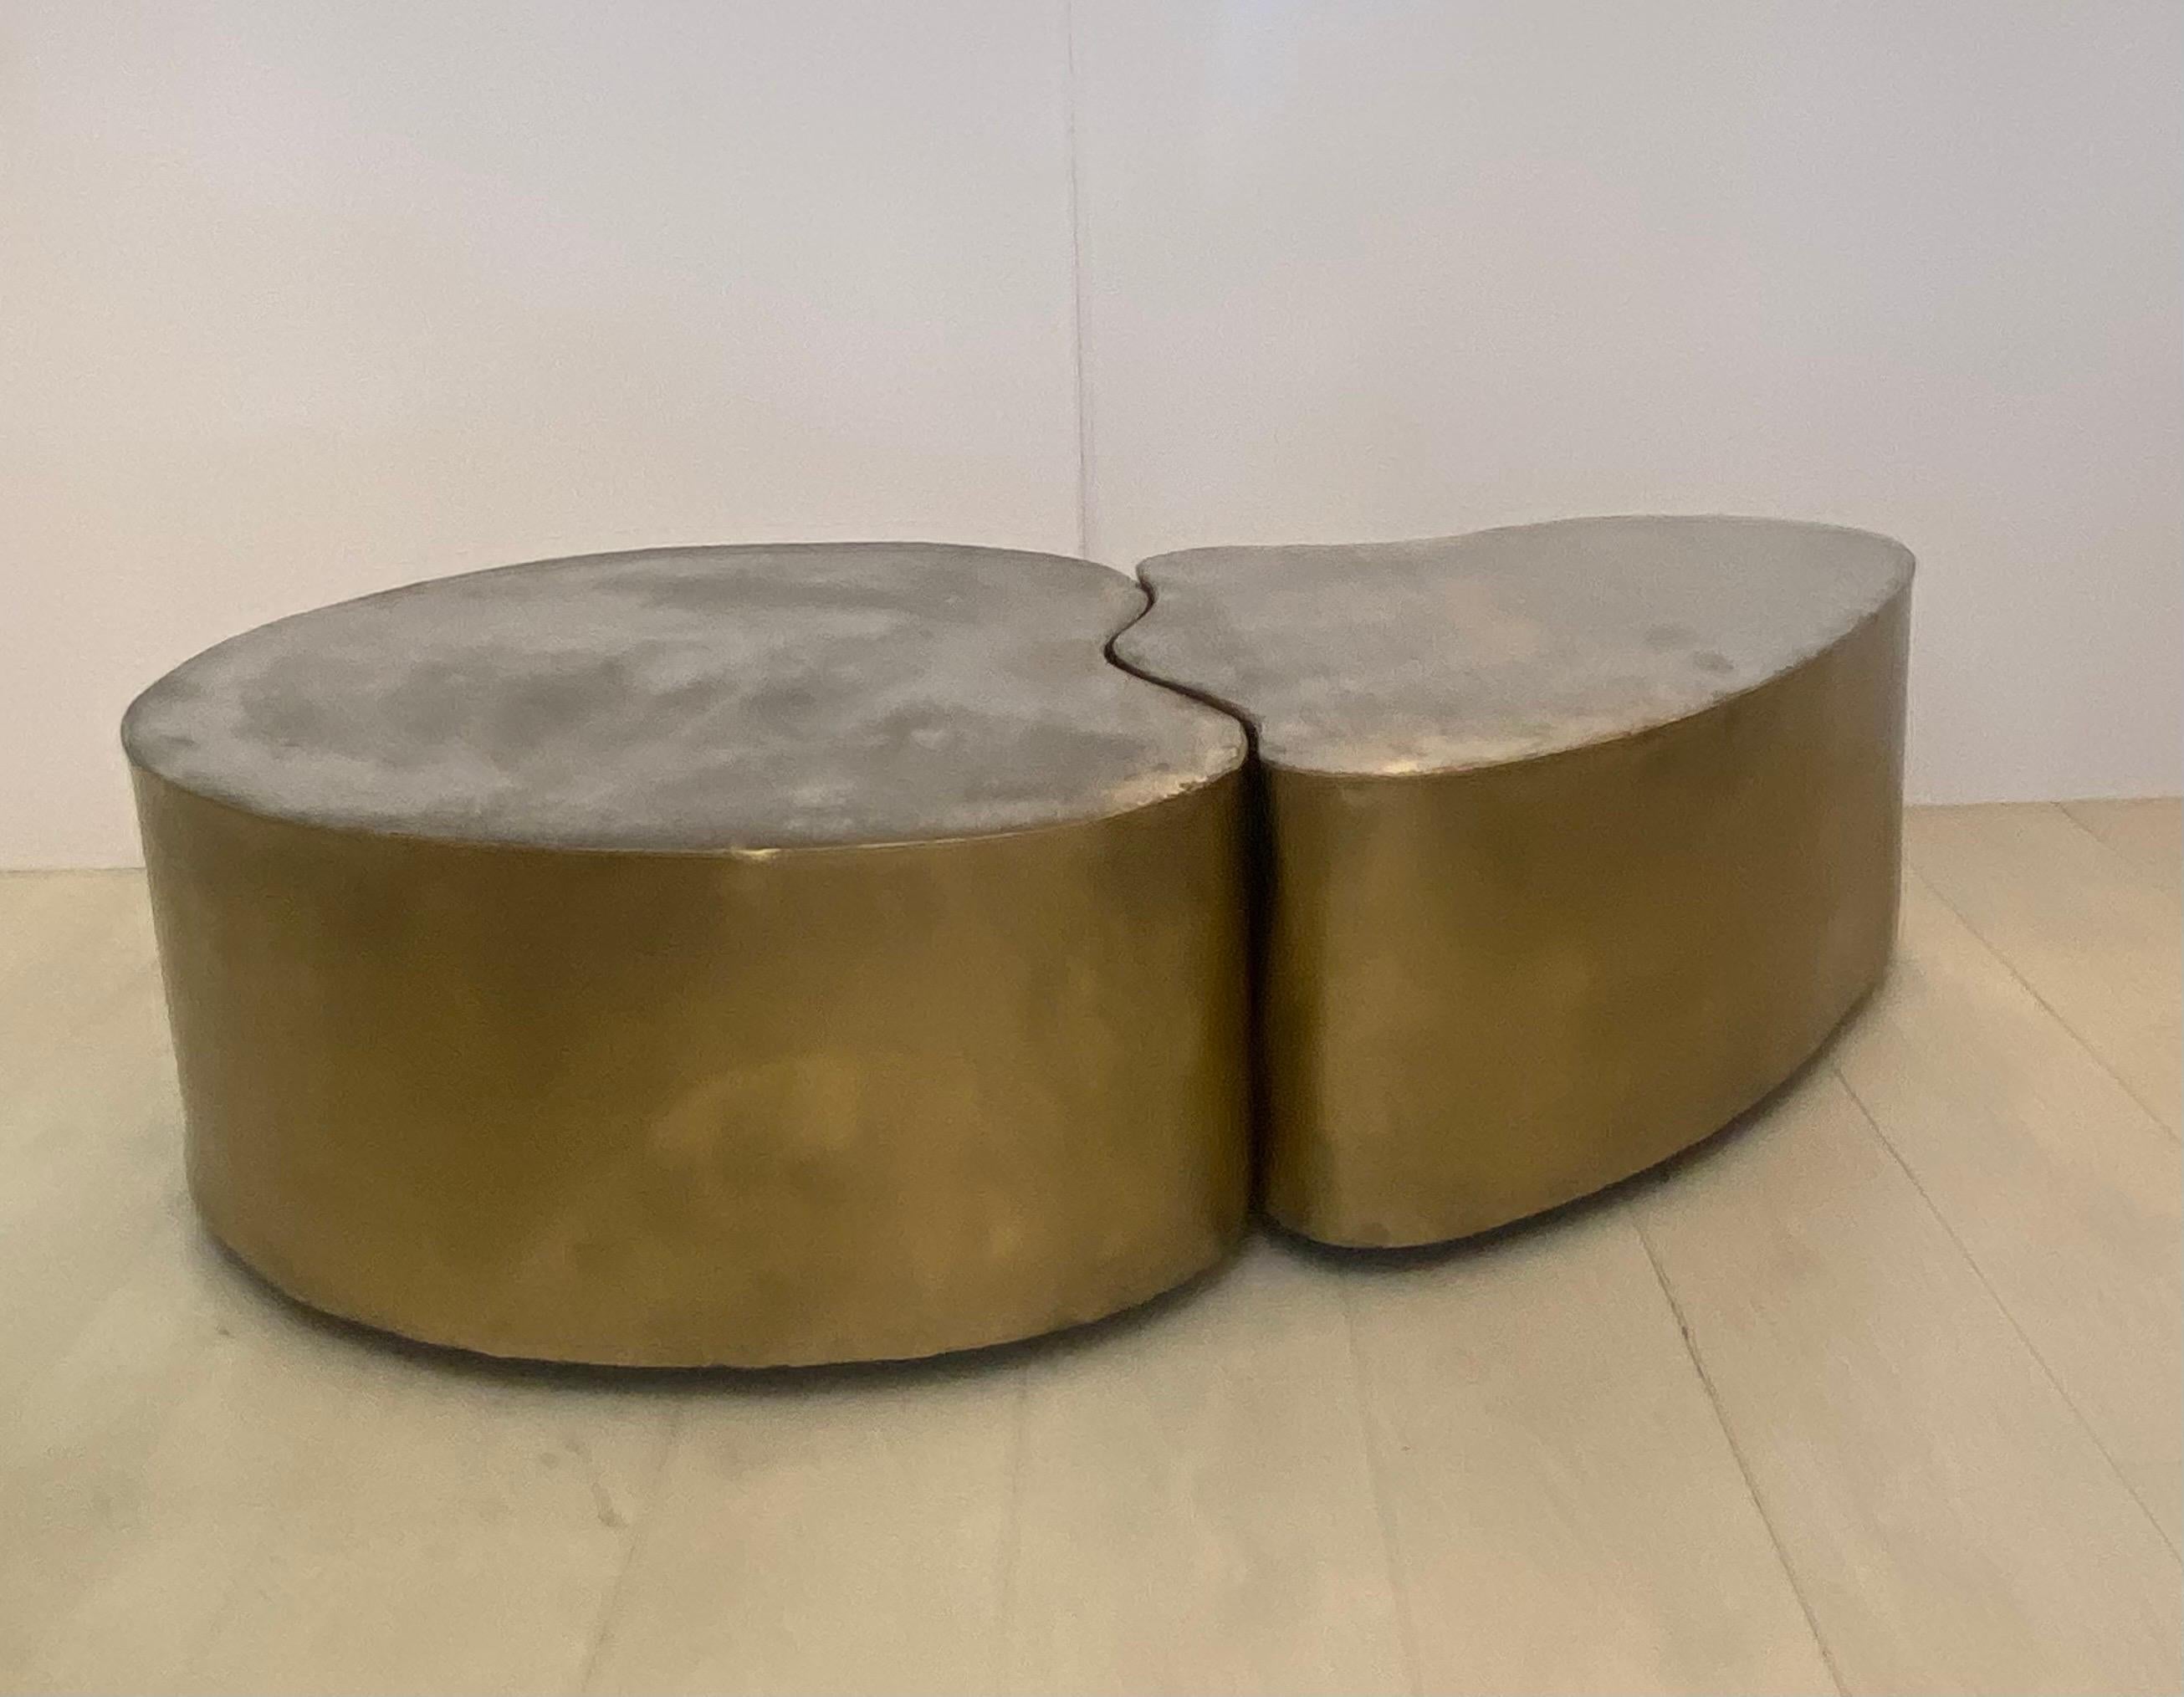 Two rare freeform patinated brass bases with brushed steel tops on Hidden castors .signed Silas Seandel 1972 .signed on the side of the smaller table. Size of larger table 33 1/2” x 30 1/2” x 13” tall… Size of smaller table 32 1/2” x 23” x 13” tall.